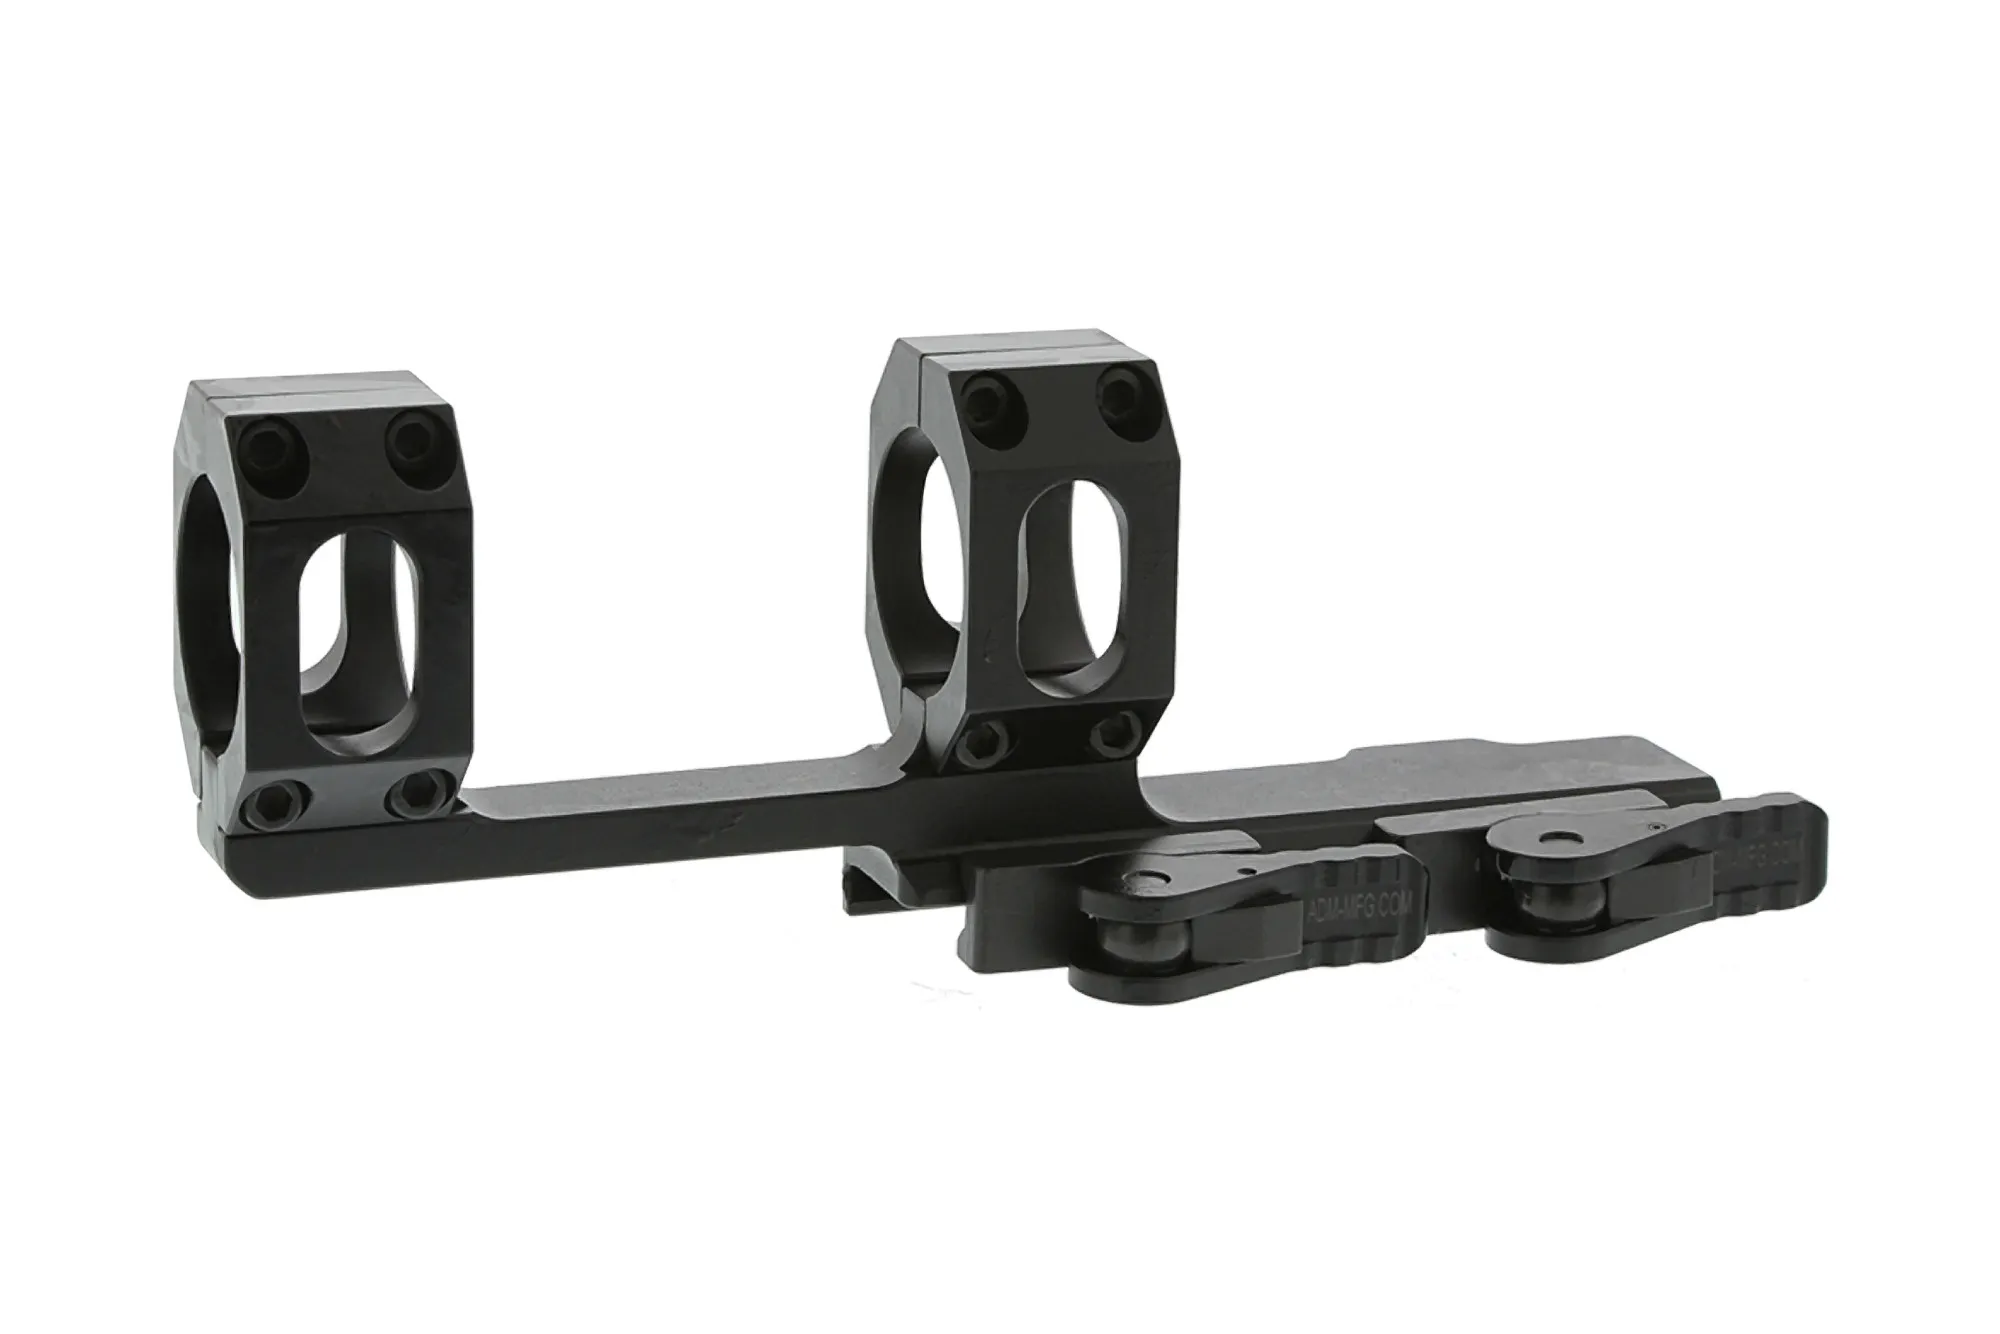 American Defense Recon Extended Quick Detach 30mm Scope Mount - Black - $179.99 (add to cart to get this price)